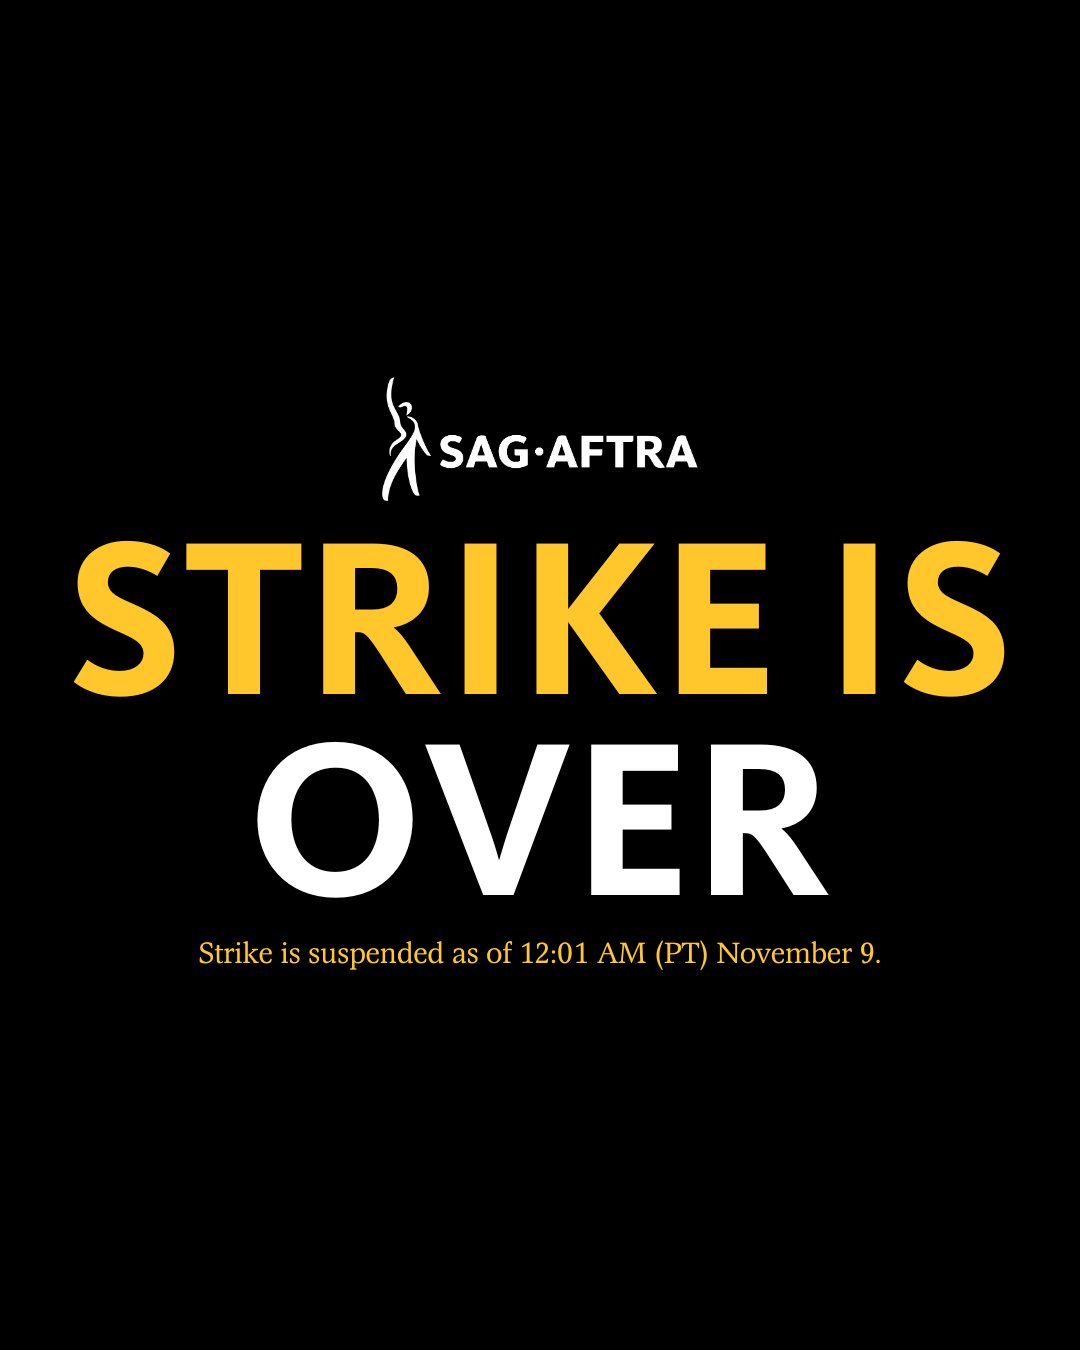 On a black background. A white figure with its right arm upraised. Next to it. In white tex: SAG-AFTRA. Below. In yellow text: STRIKE IS. Below. In white text: OVER. Below. In small, yellow text: Strike is suspended as of 12:01 AM (PT) November 9.